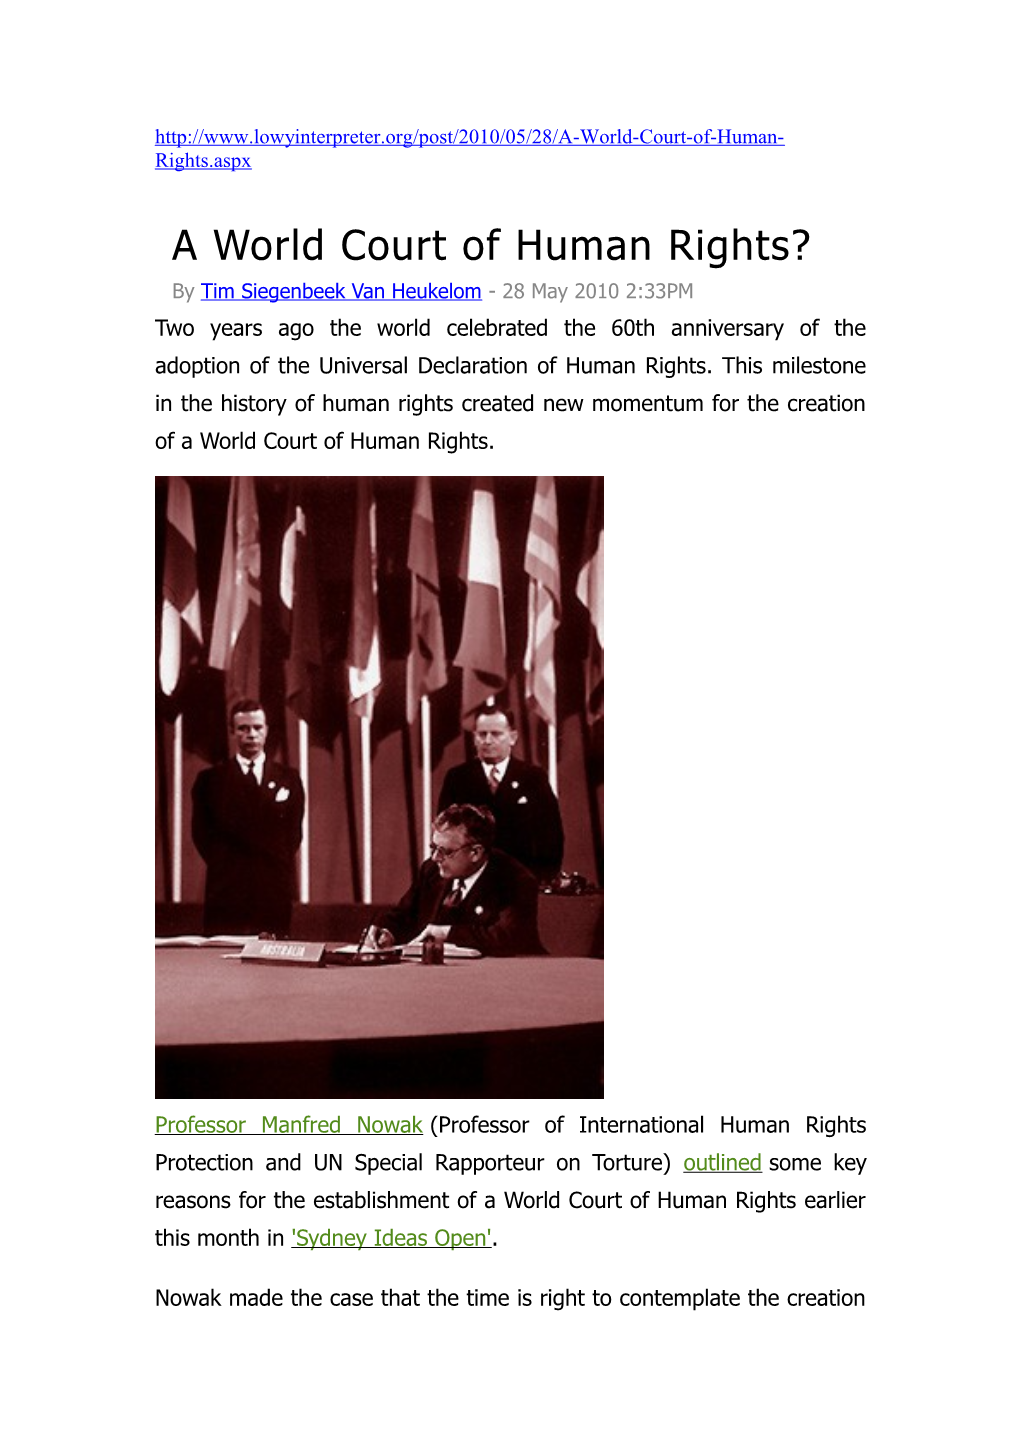 A World Court of Human Rights?